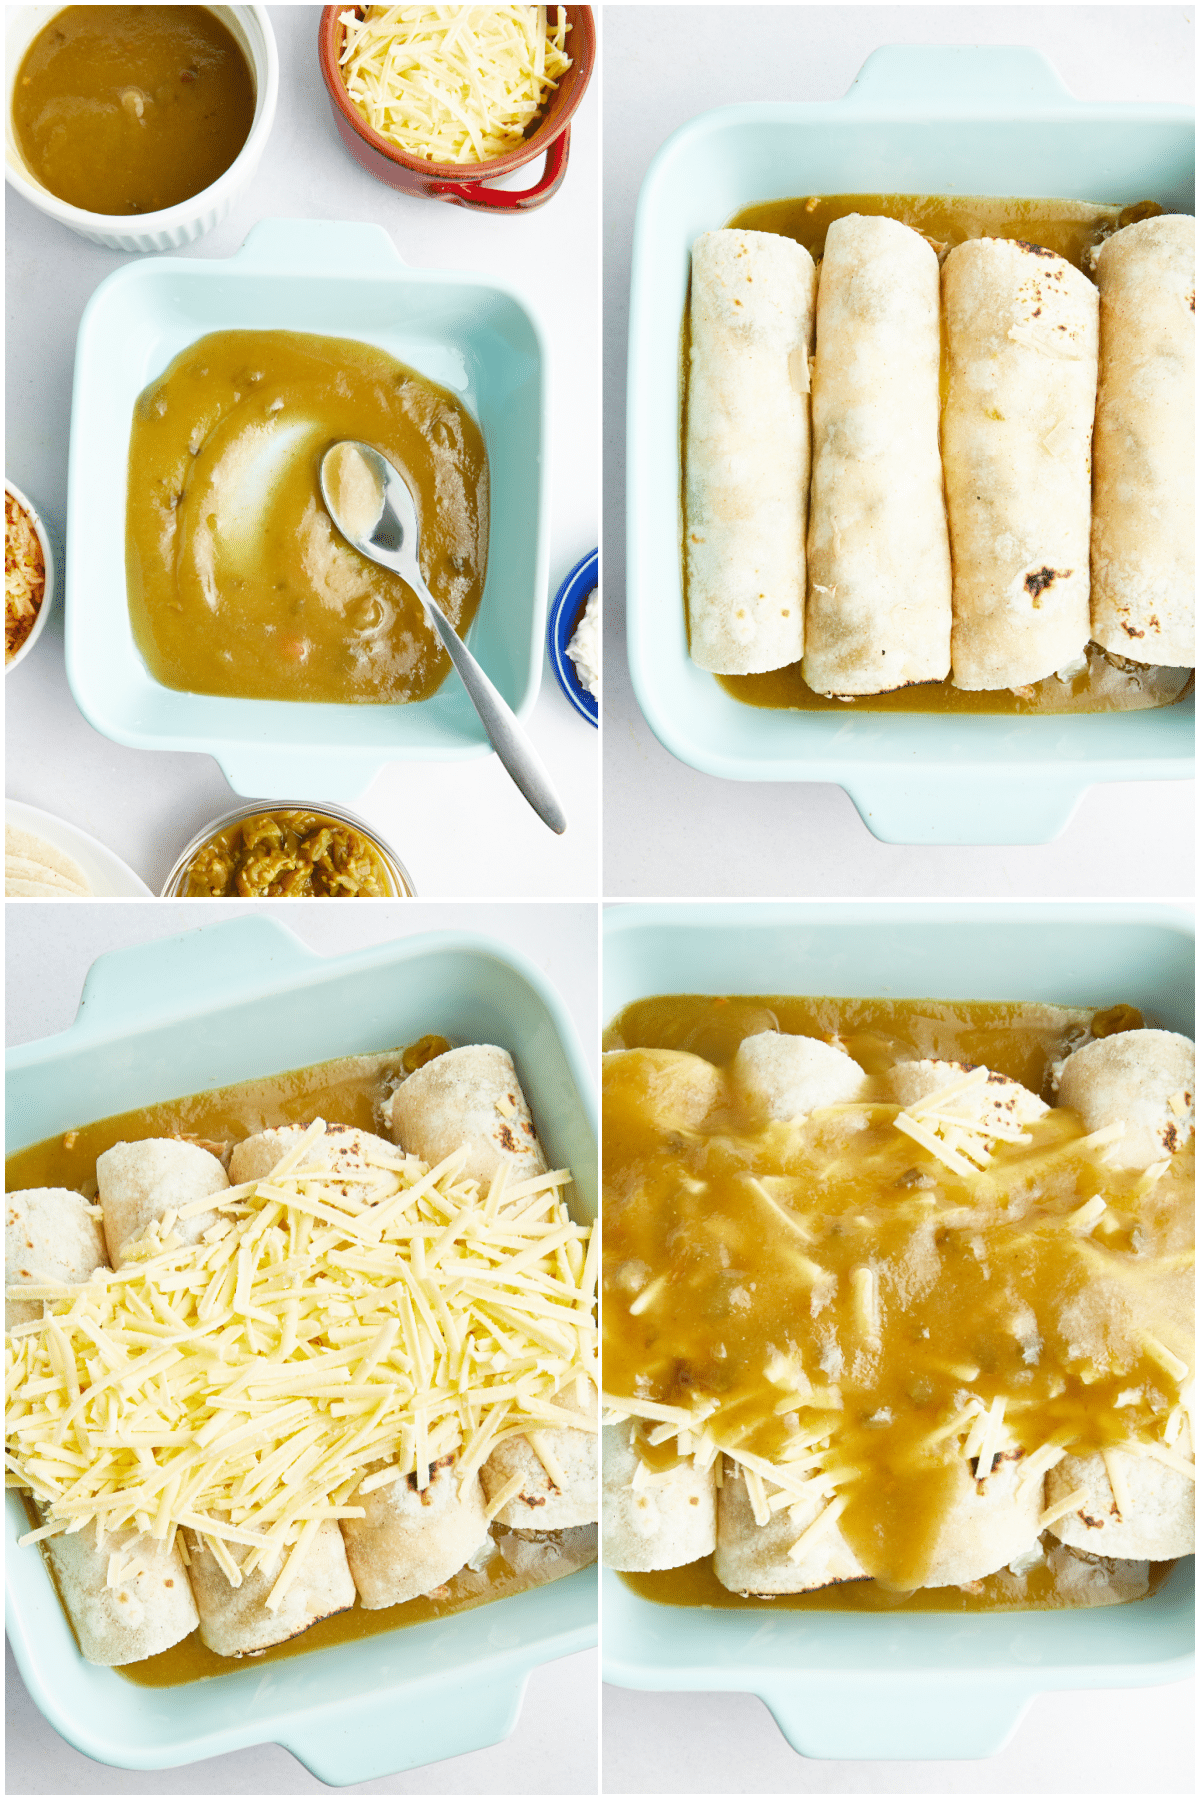 A four image collage showing how to make dairy free Hatch enchiladas: pour and spread enchilada sauce in bottom of a baking dish, roll filled tortillas and line up across dish, top with dairy free cheese and more enchilada sauce.